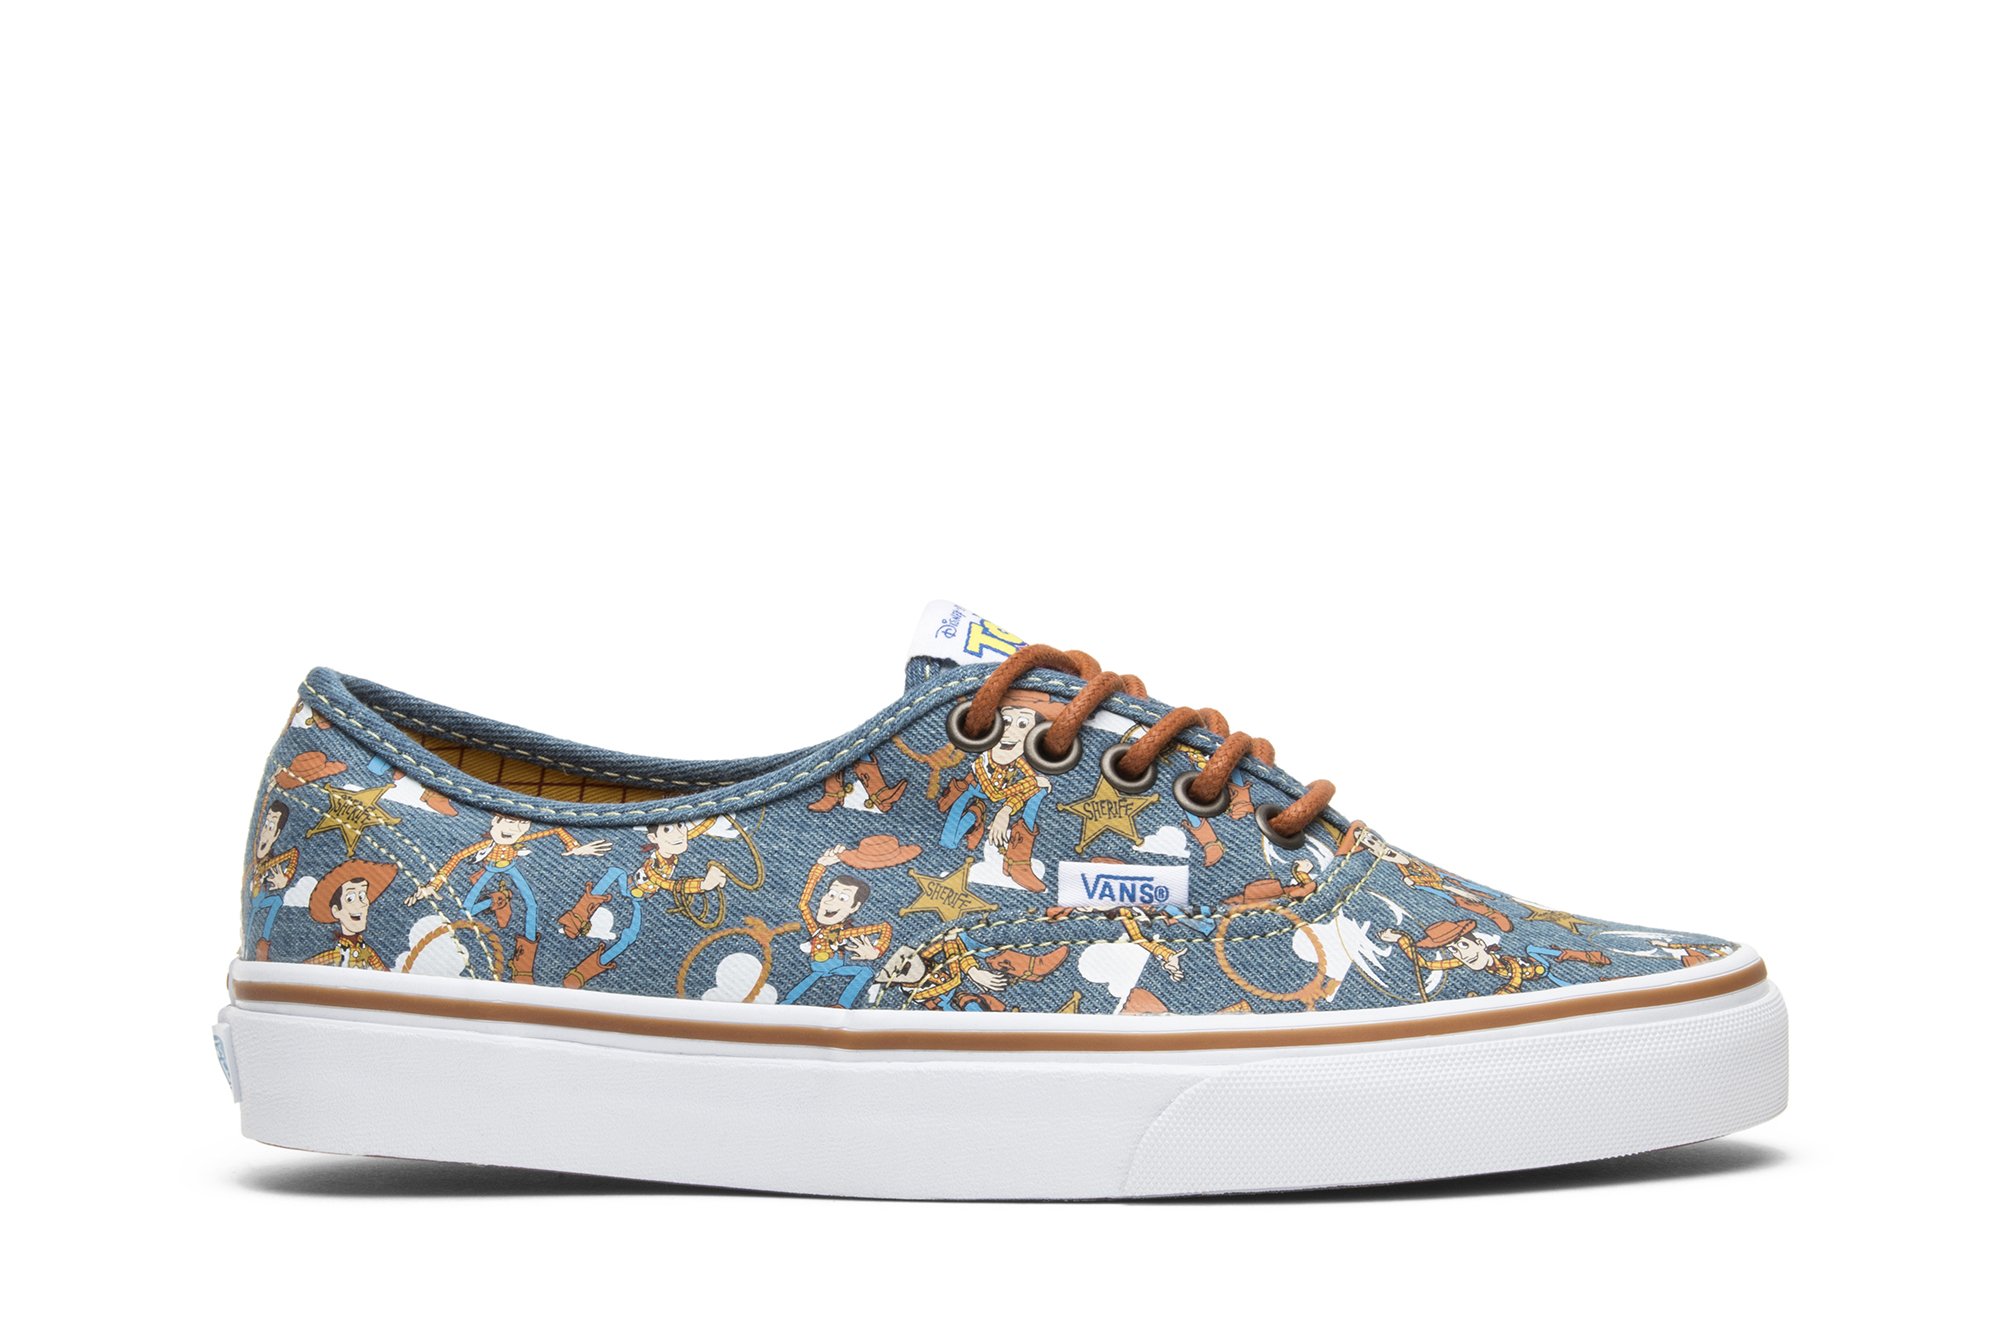 Toy Story x Authentic 'Woody'